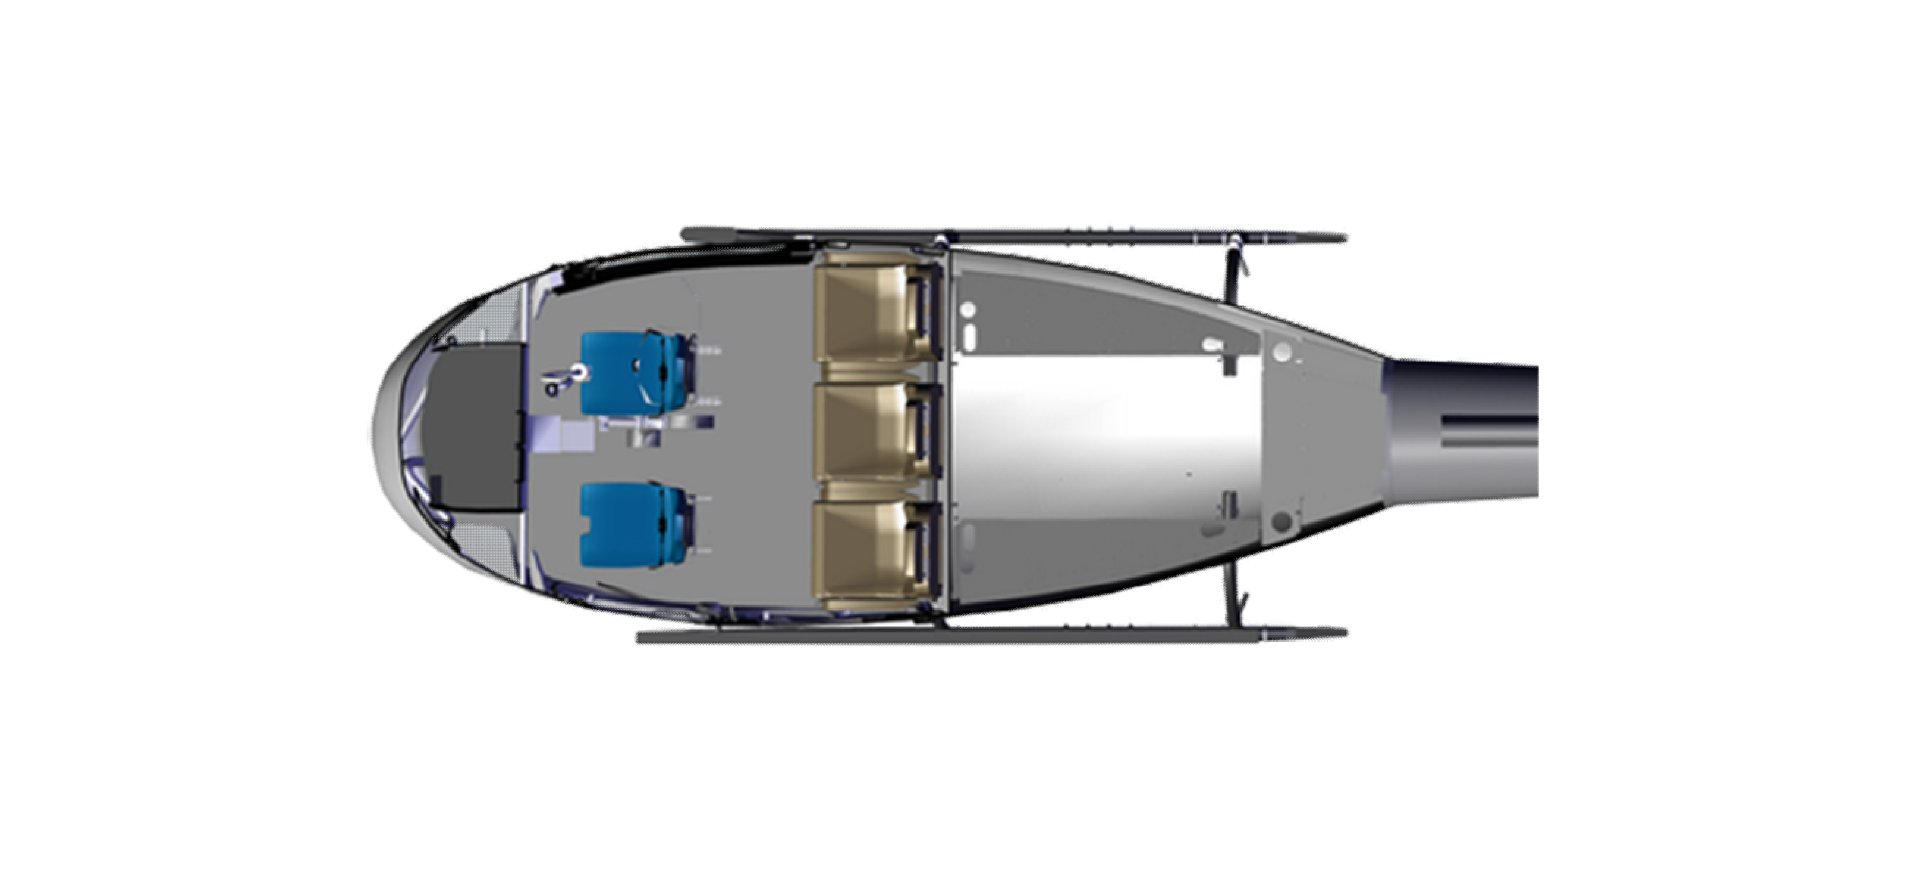 A four-passenger cabin configuration for Airbus’ H125 helicopter, ideal for private and business aviation